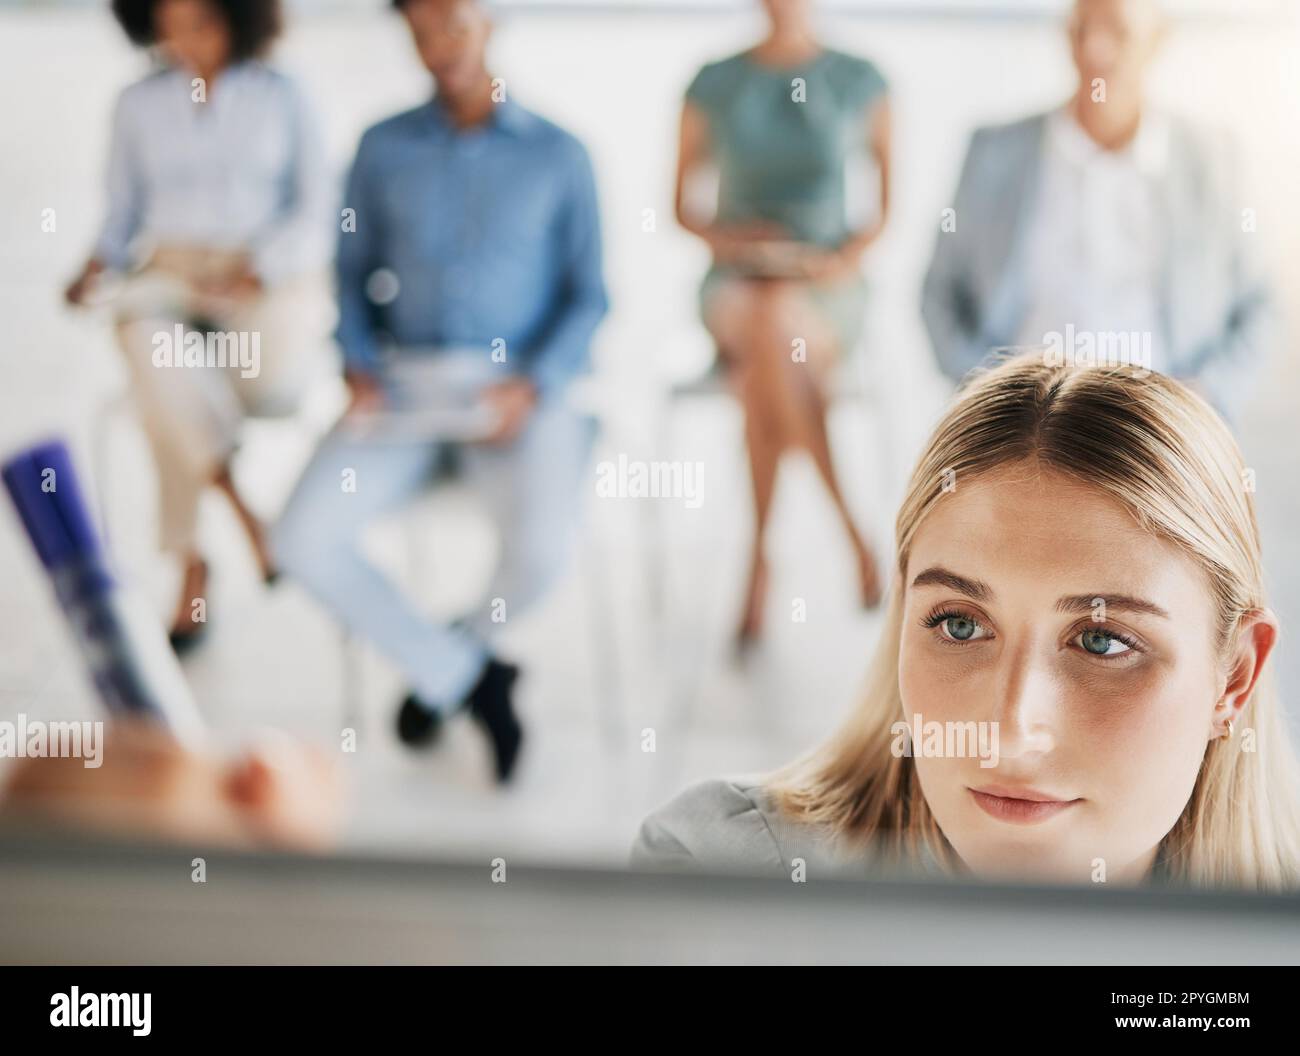 Presentation, writing and business woman in meeting for planning sales, advertising and marketing strategy. Leadership, training and female employee presenting creative ideas in company workplace. Stock Photo